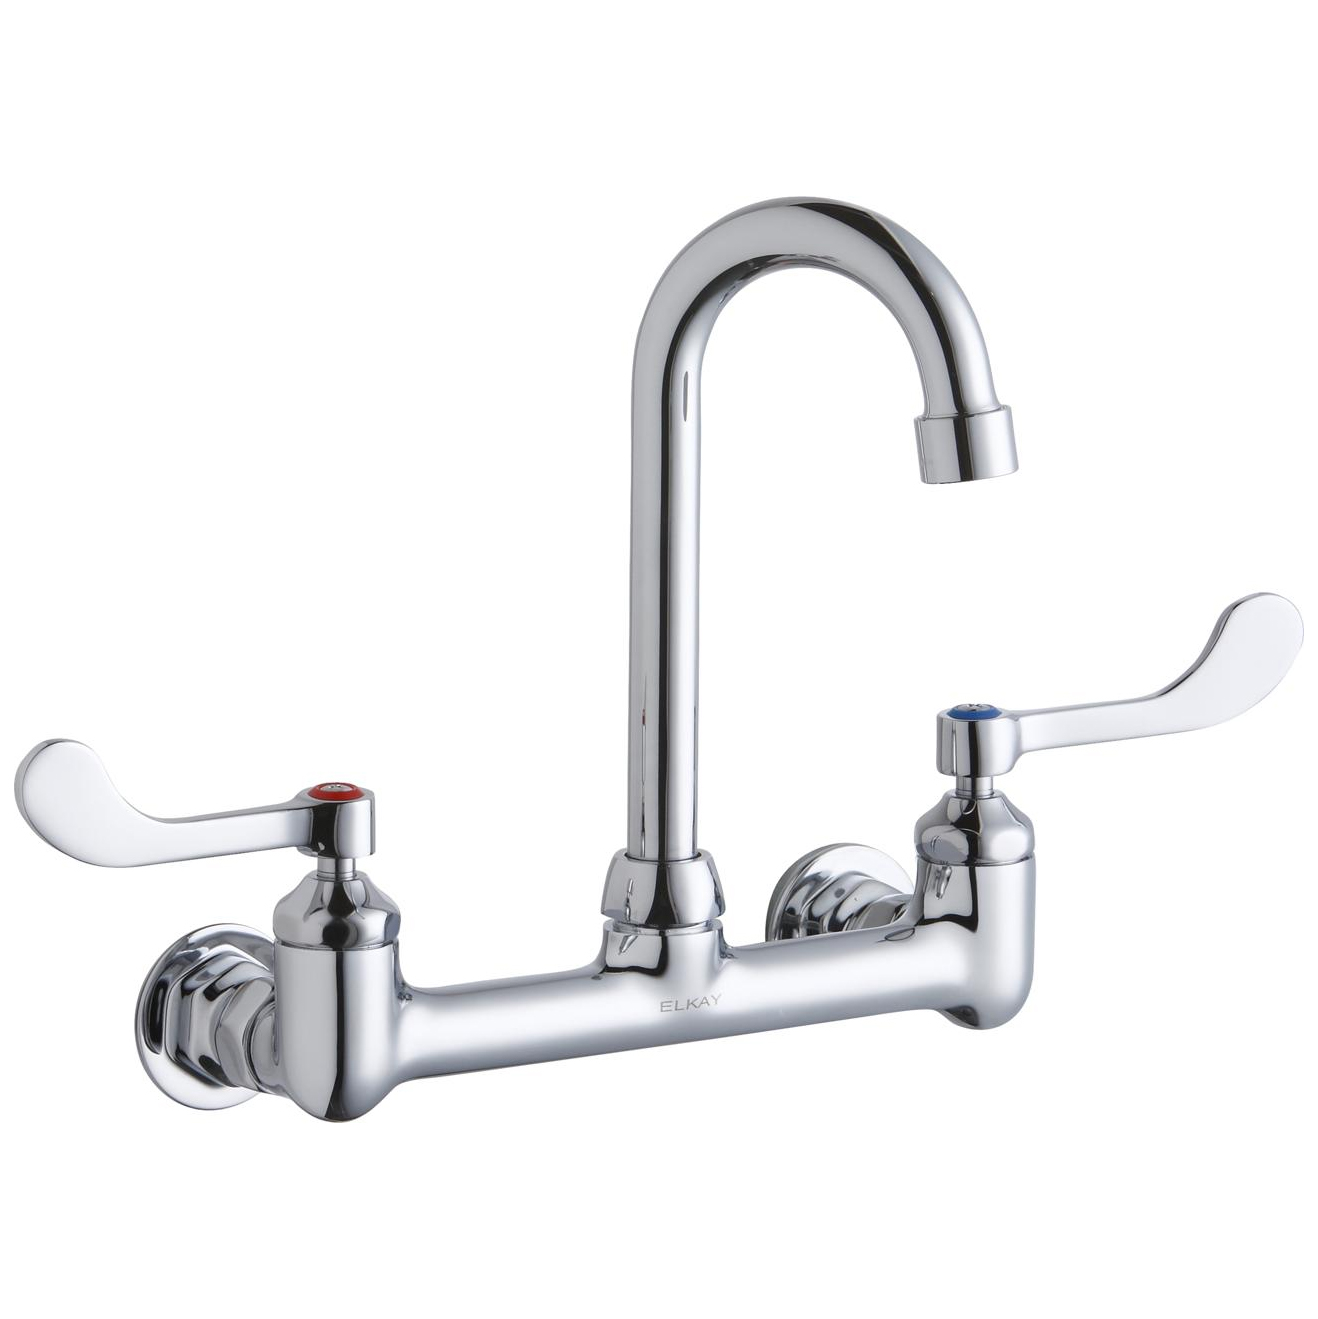 Wall Mount Faucet In Chrome